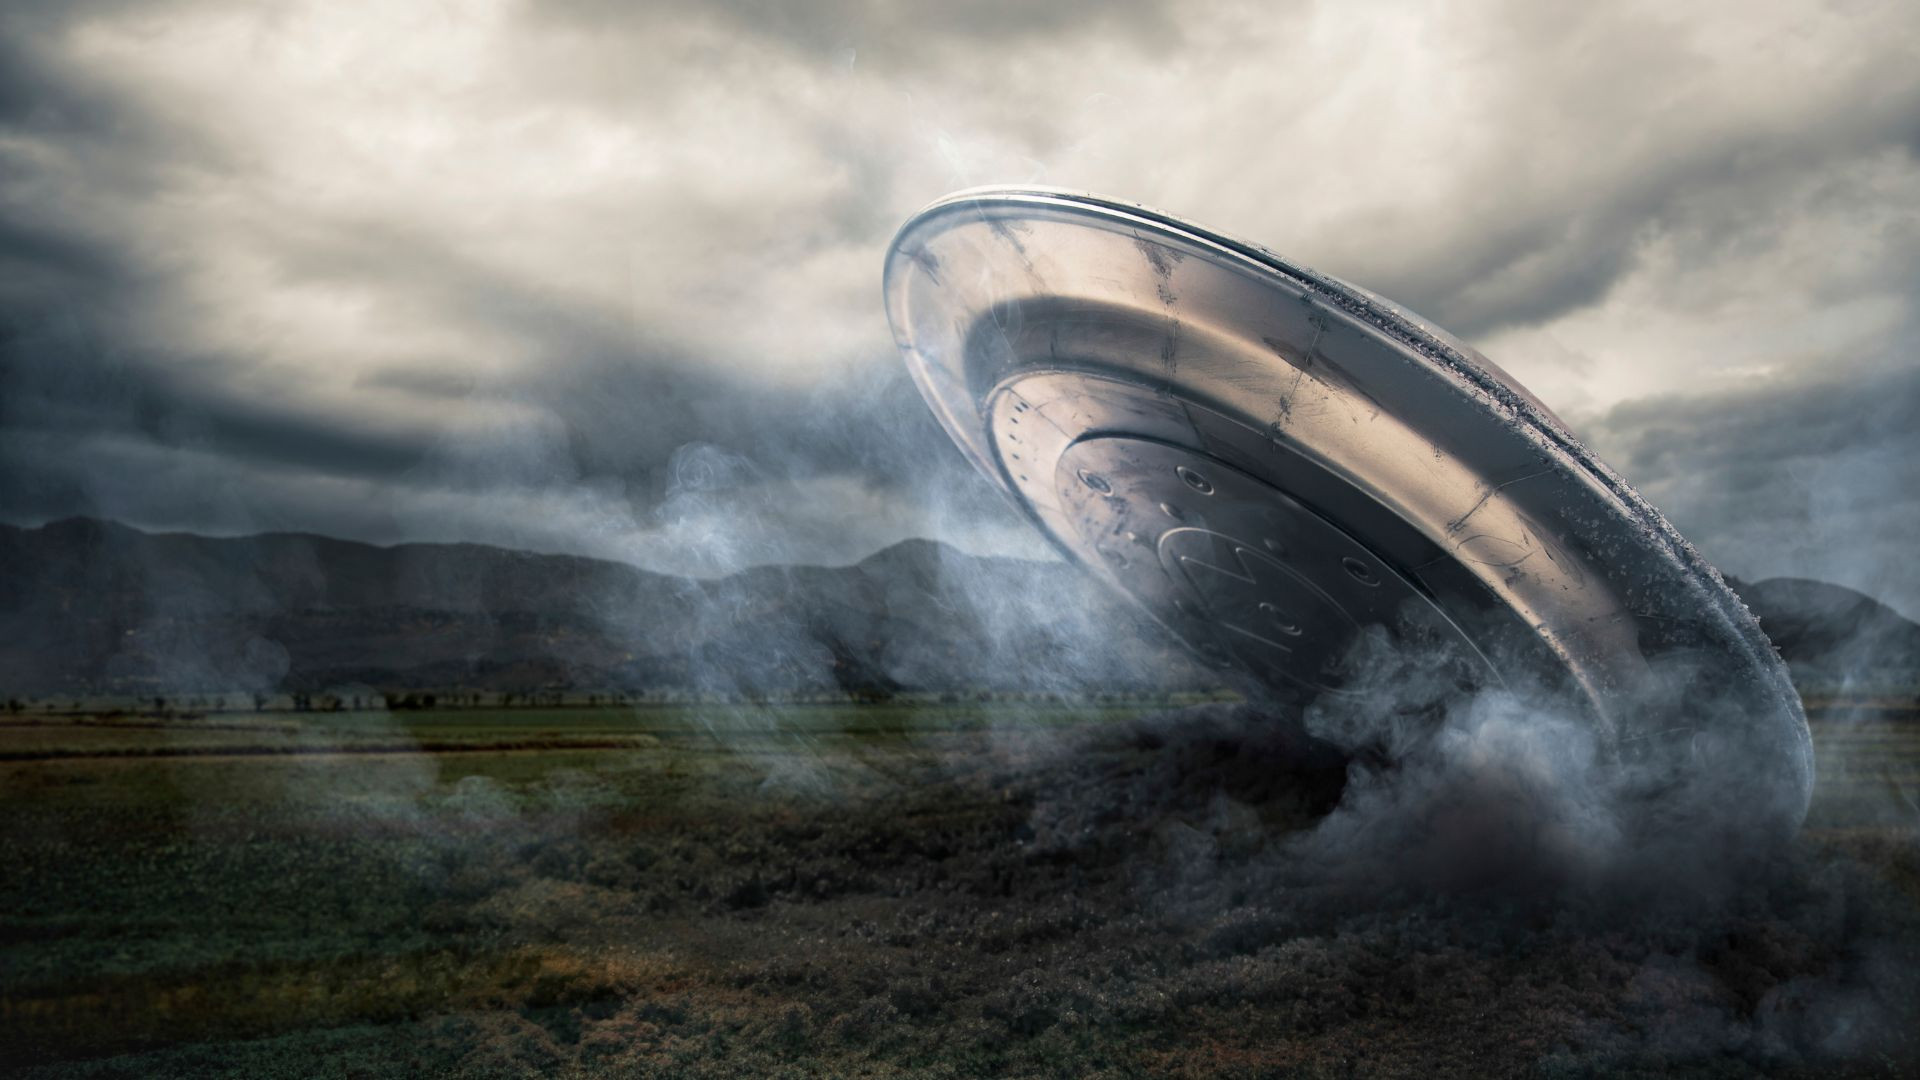 World's first UFO crash happened in Italy, 14 years before Roswell, claims  researcher